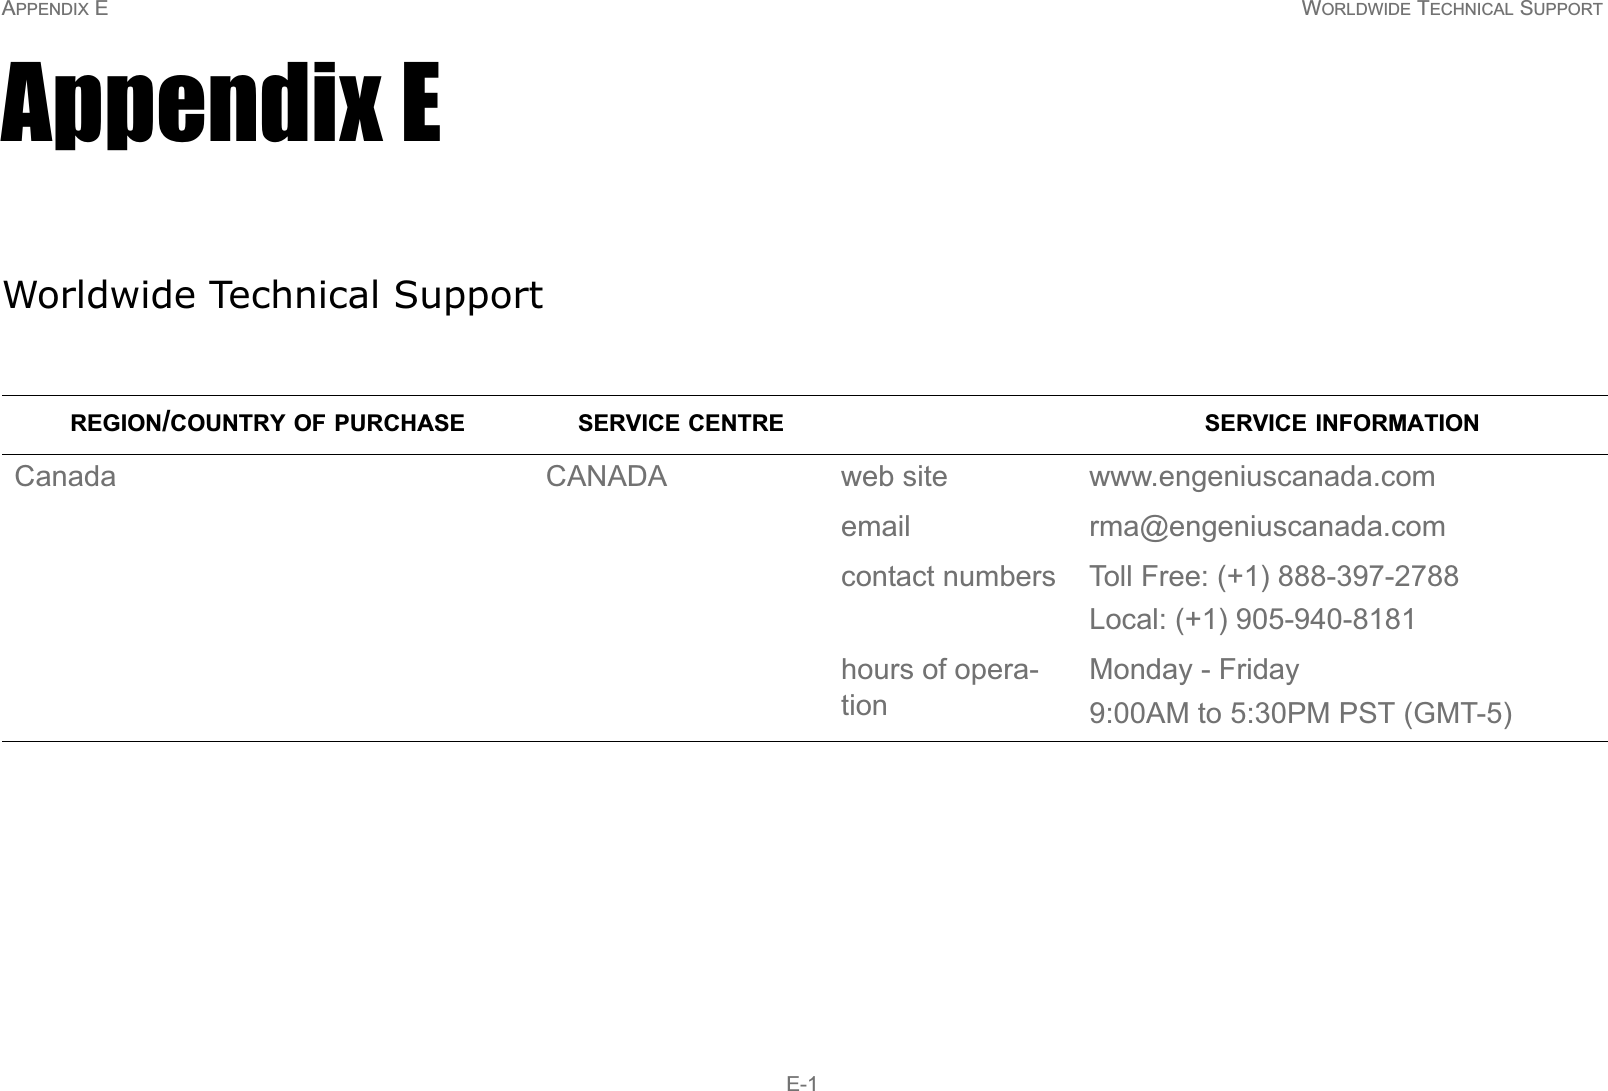 APPENDIX E WORLDWIDE TECHNICAL SUPPORT E-1Appendix EWorldwide Technical SupportREGION/COUNTRY OF PURCHASE SERVICE CENTRE SERVICE INFORMATIONCanada CANADA web site www.engeniuscanada.comemail rma@engeniuscanada.comcontact numbers Toll Free: (+1) 888-397-2788Local: (+1) 905-940-8181hours of opera-tionMonday - Friday9:00AM to 5:30PM PST (GMT-5)